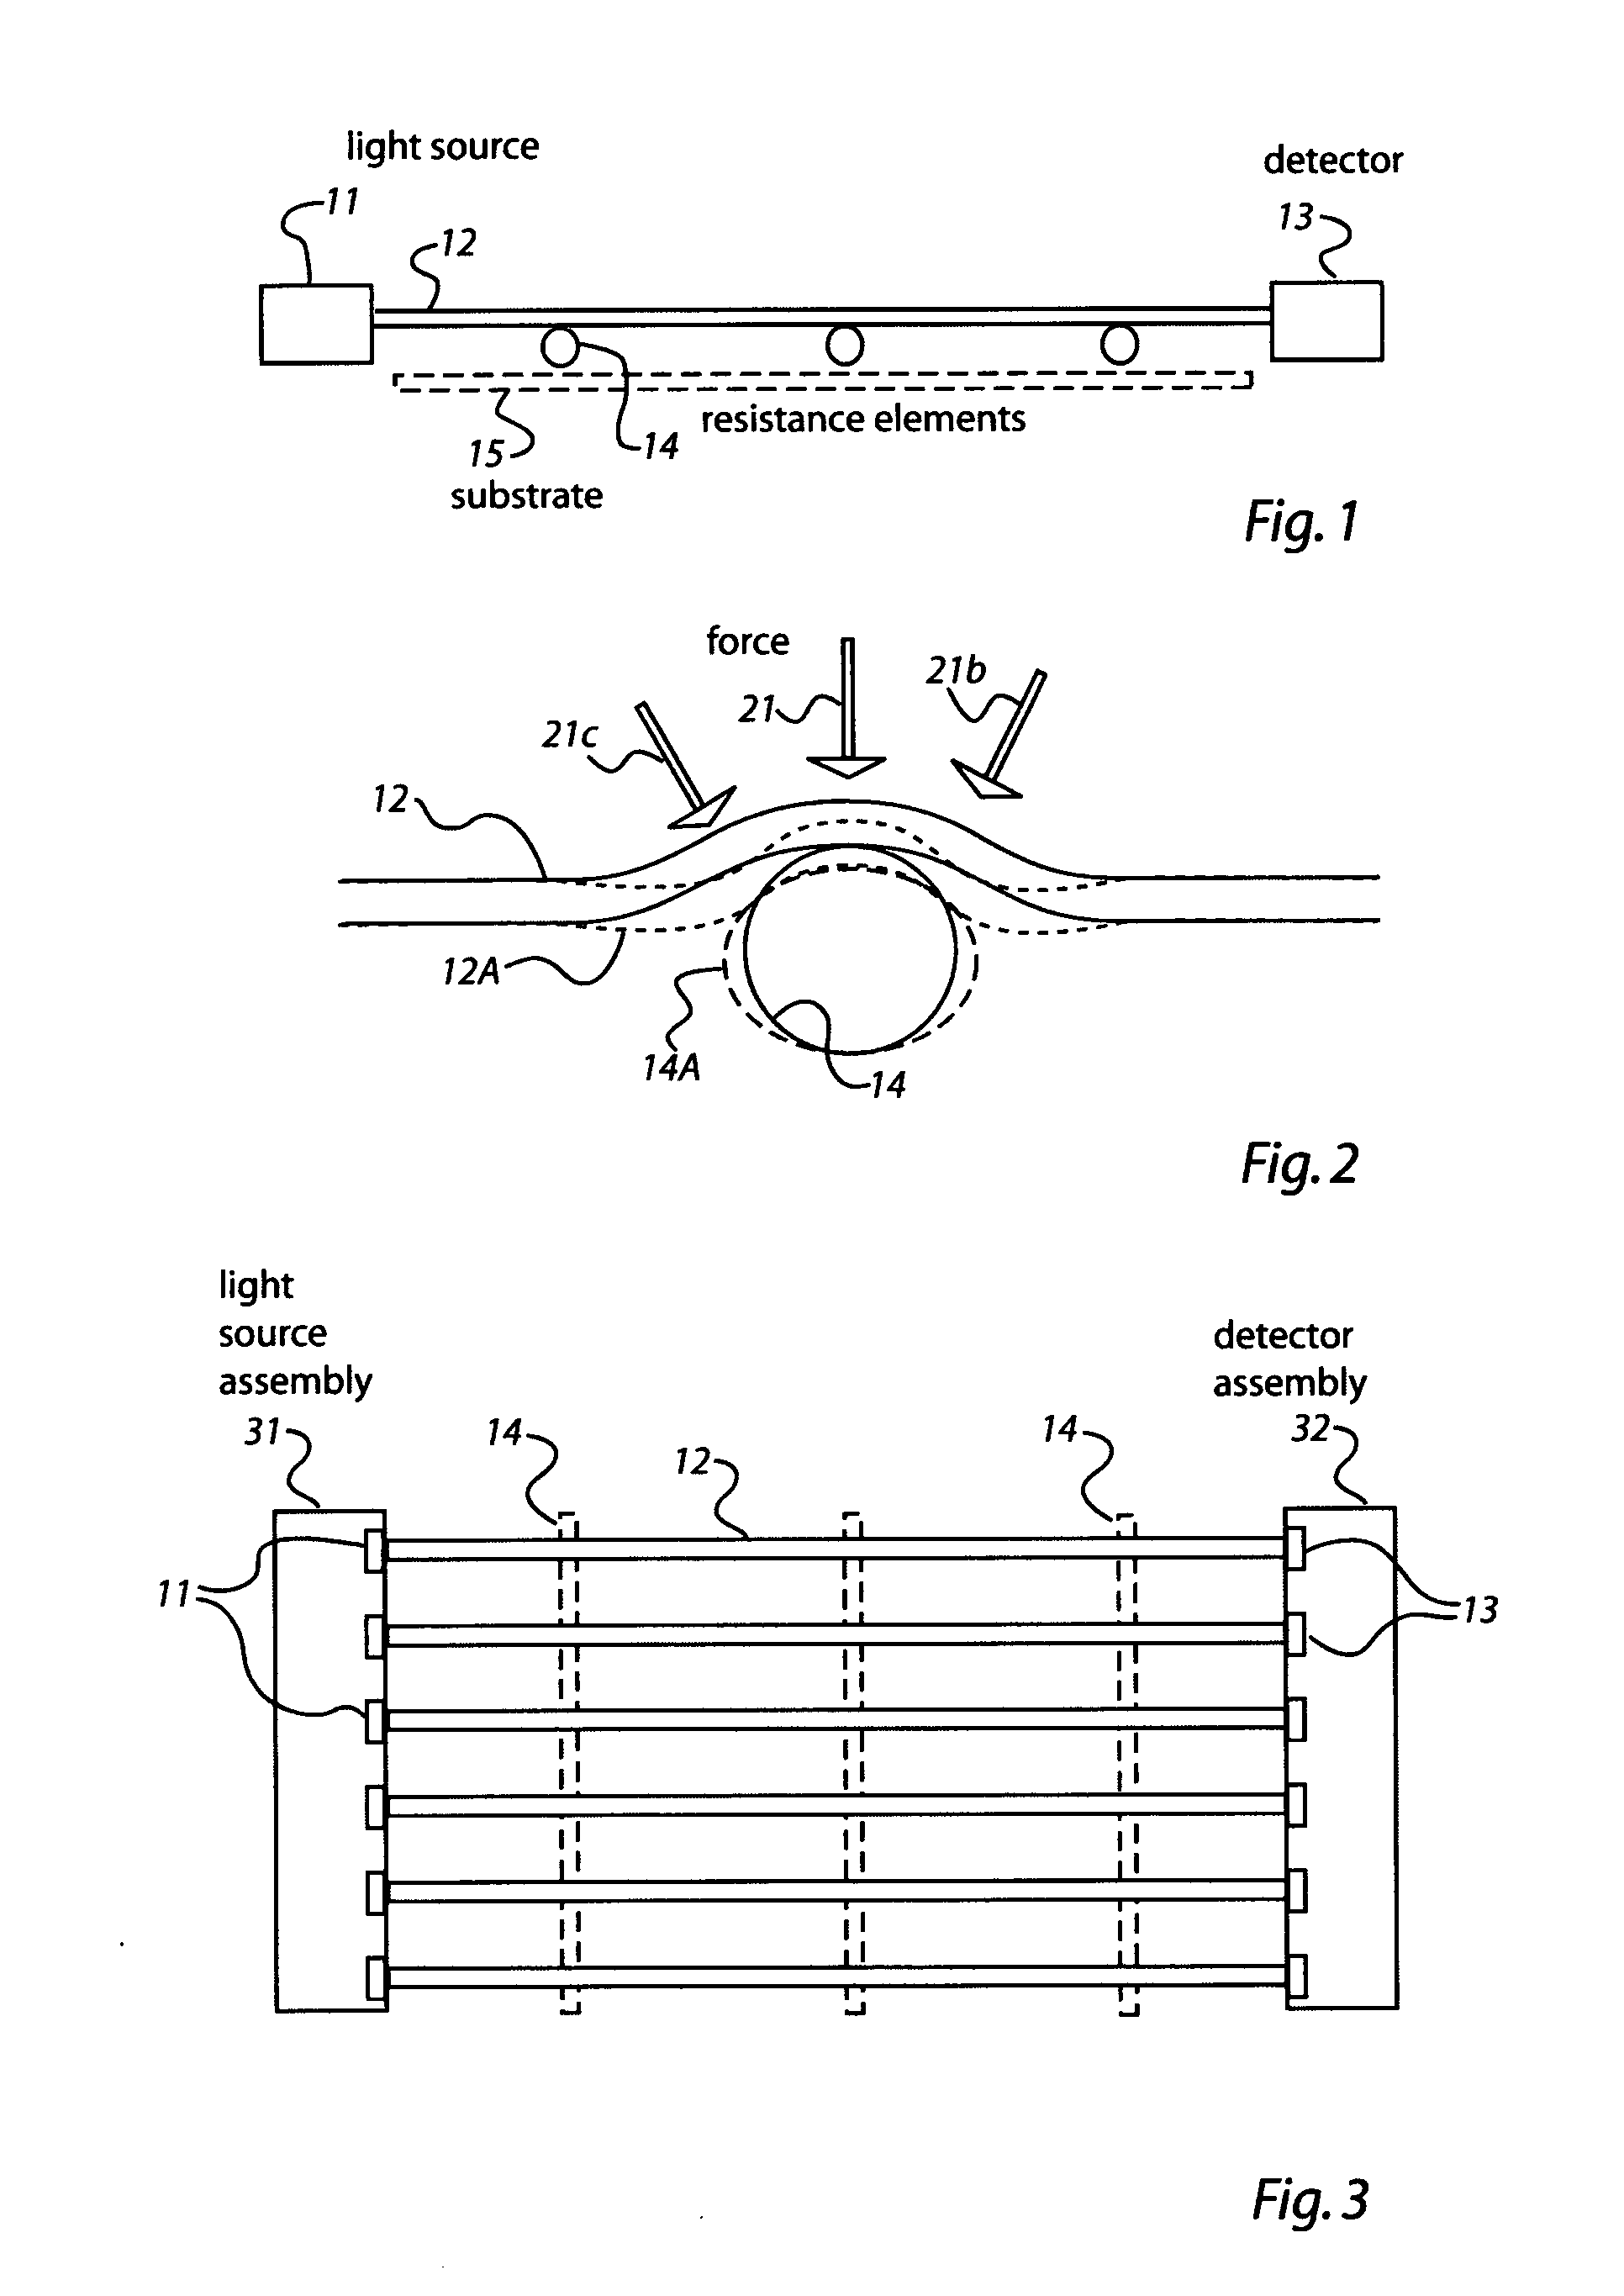 System and method for sensing loads